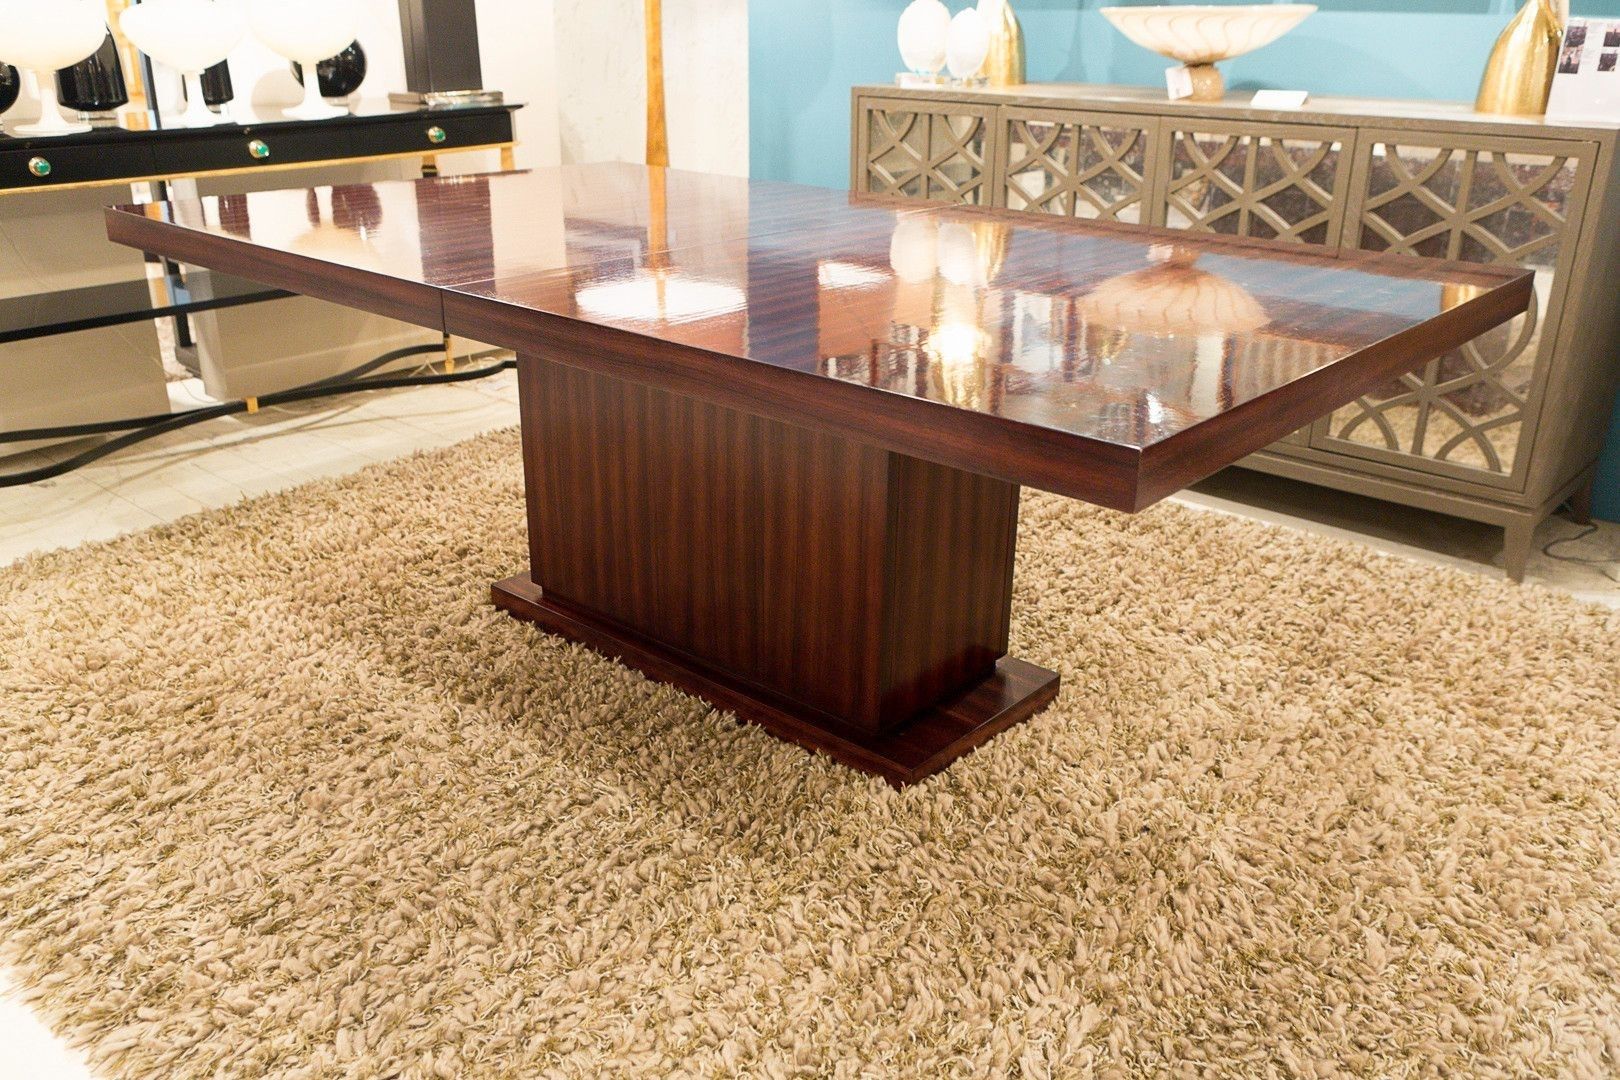 Bradford Dining Table – Vanguard Furniture | Luxe Home Philadelphia With Regard To 2017 Bradford Dining Tables (View 7 of 20)